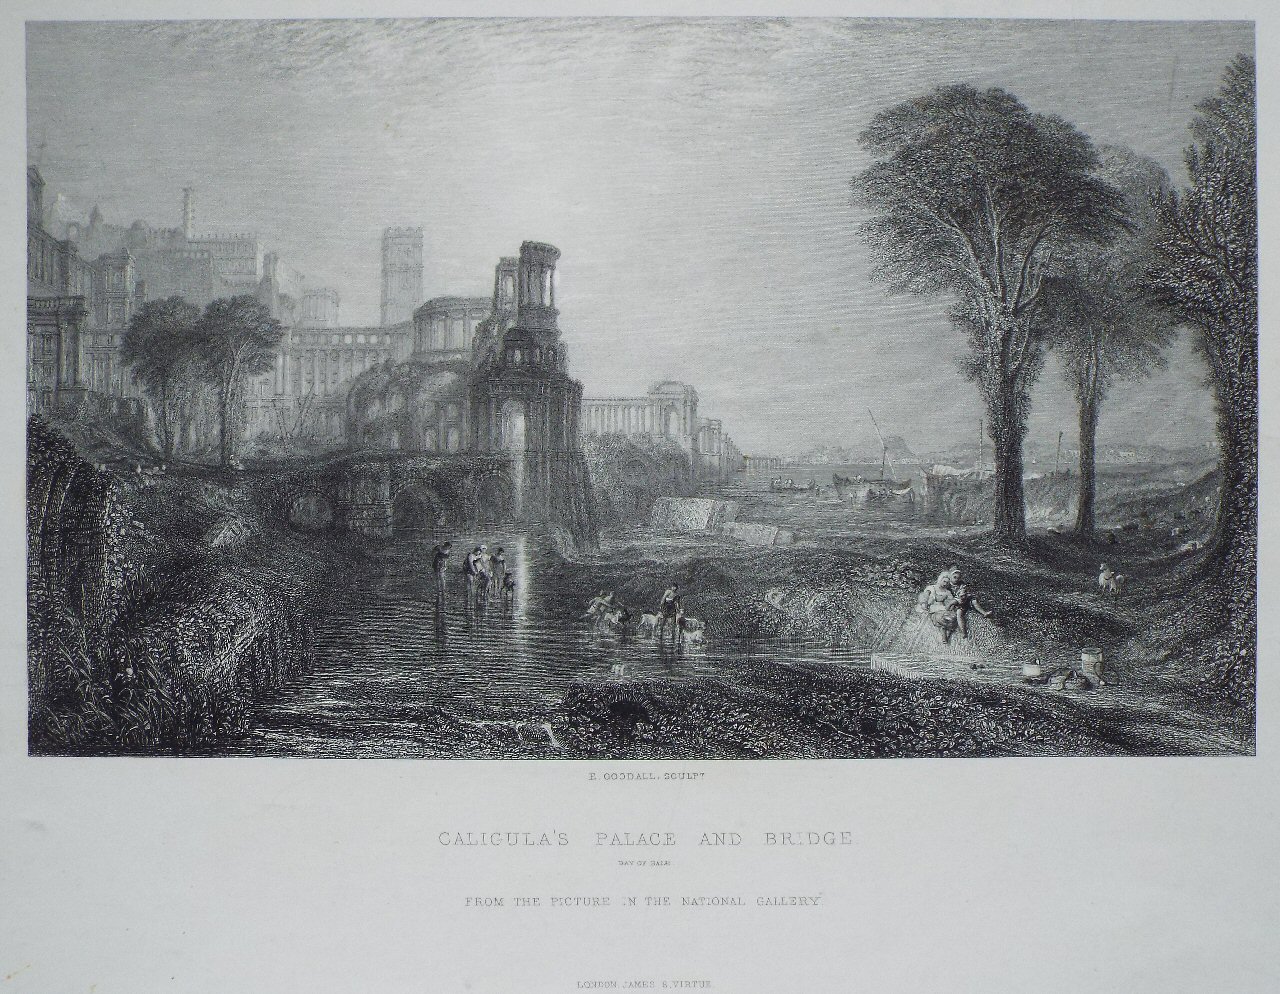 Print - Caligula's Palace and Bridge Bay of Baiae from the Picture in the National Gallery. - Goodall